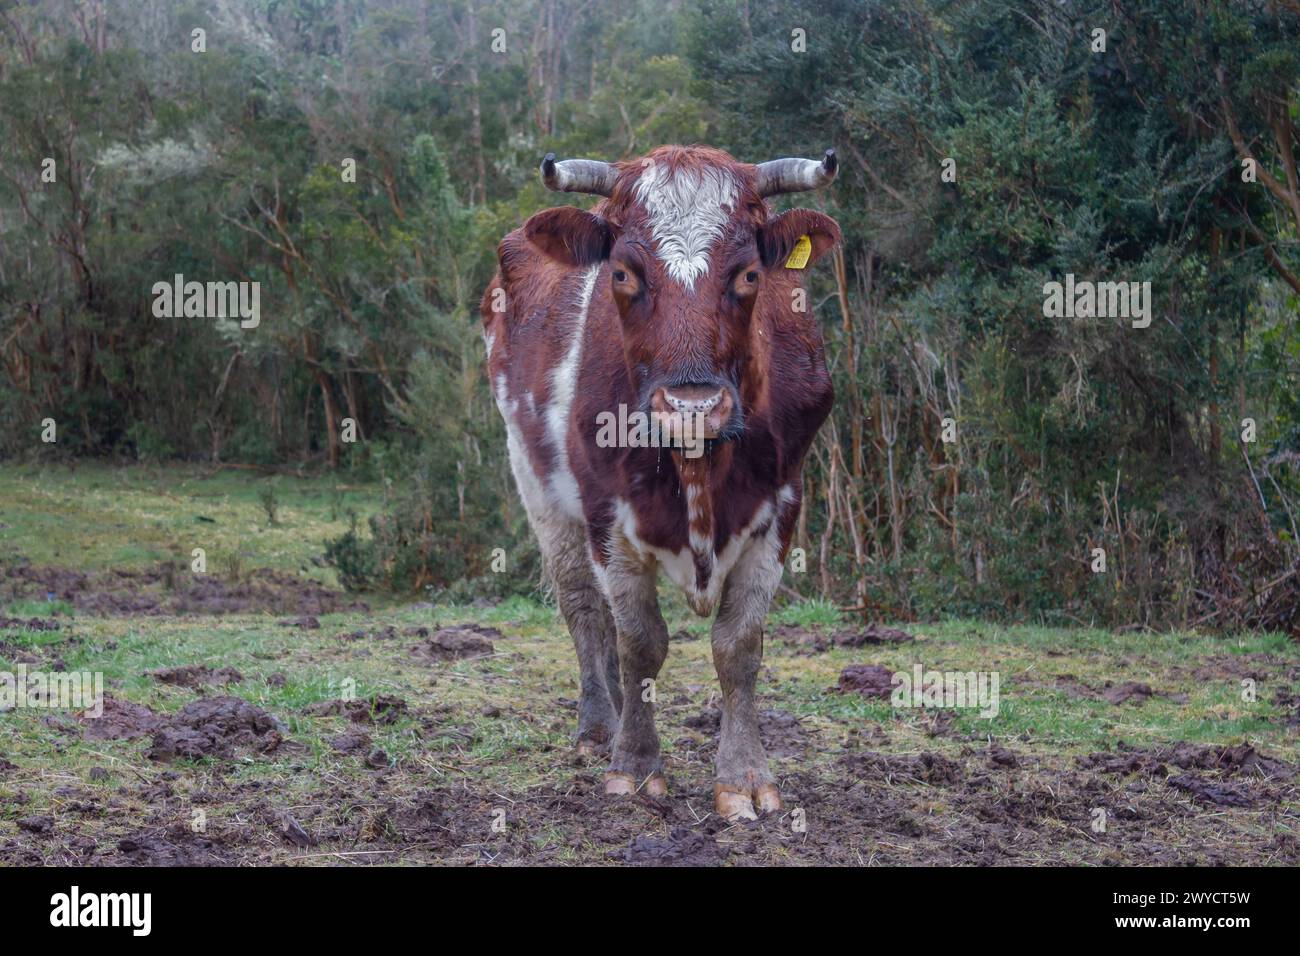 A cow with identification tags standing in a muddy field Stock Photo